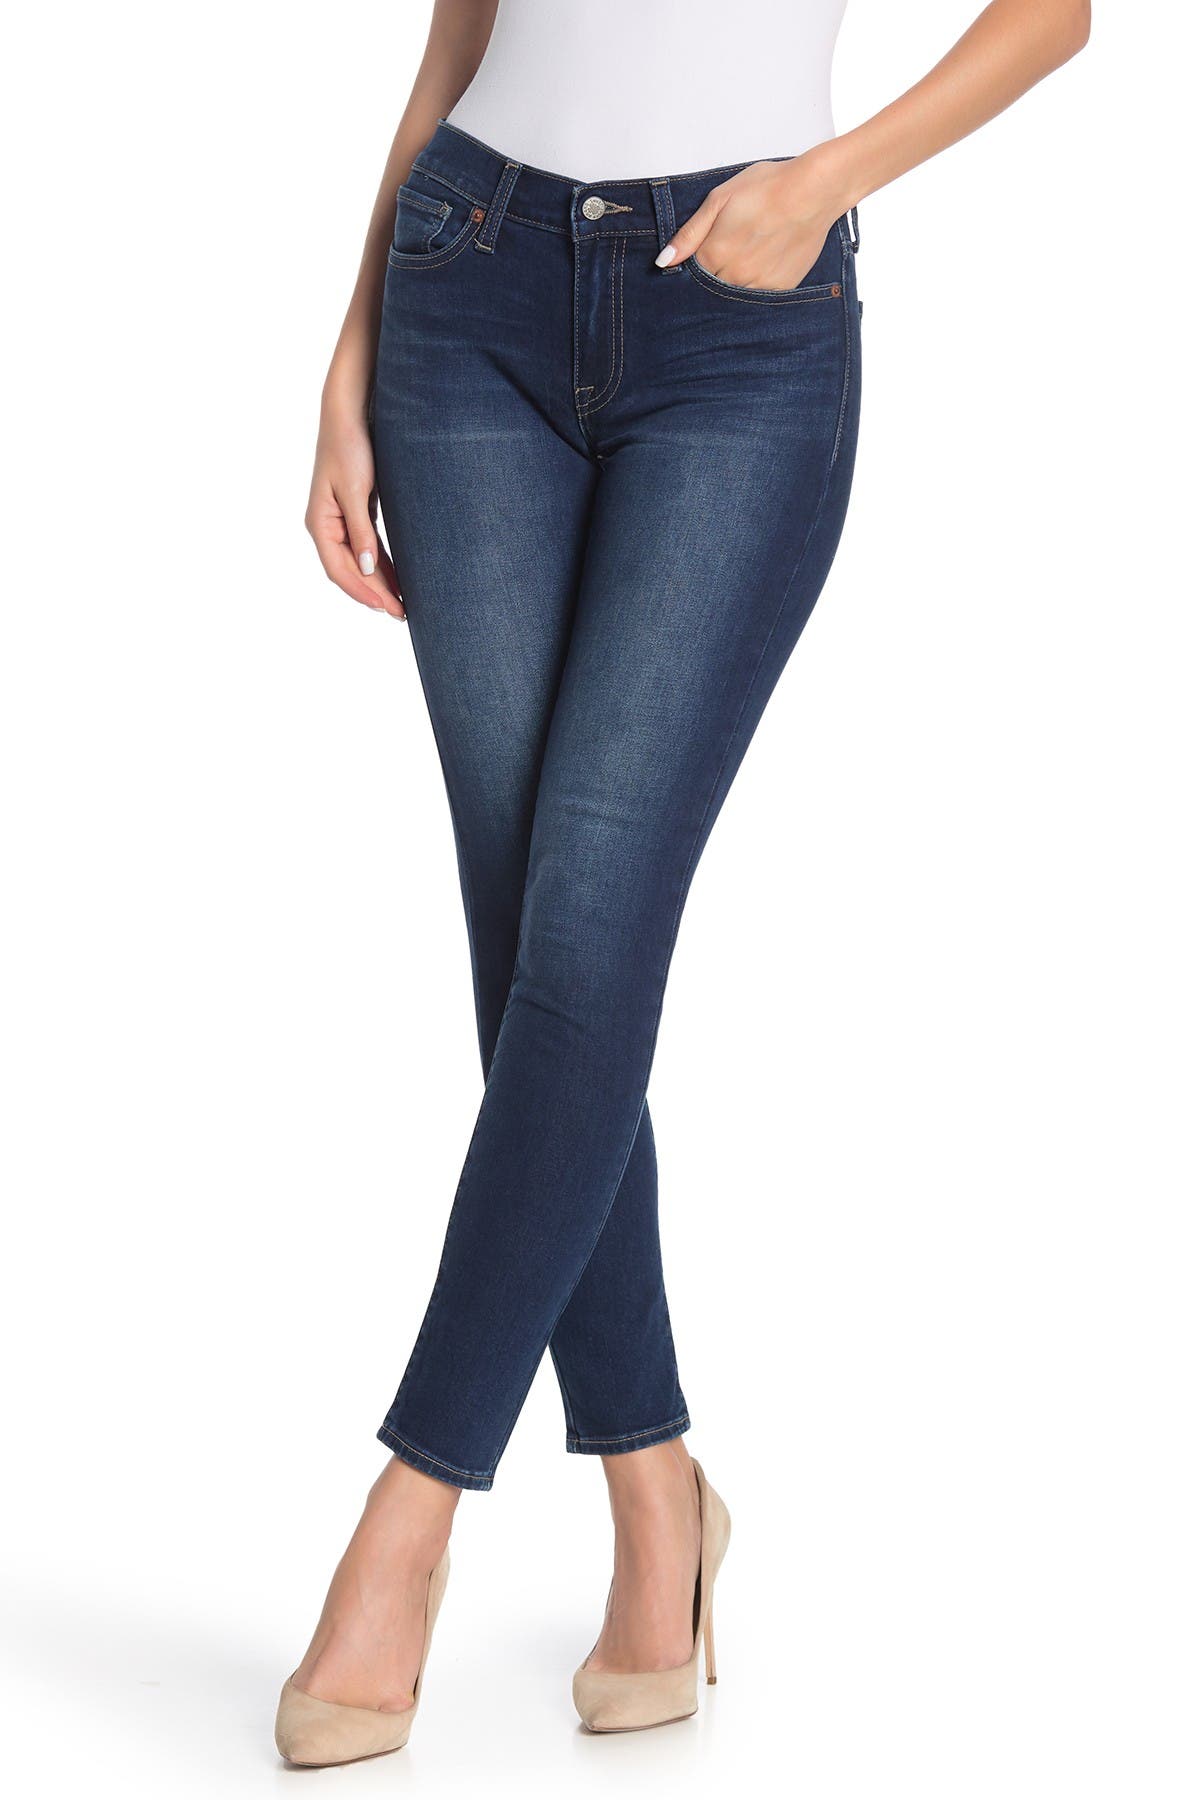 lucky brand ankle jeans